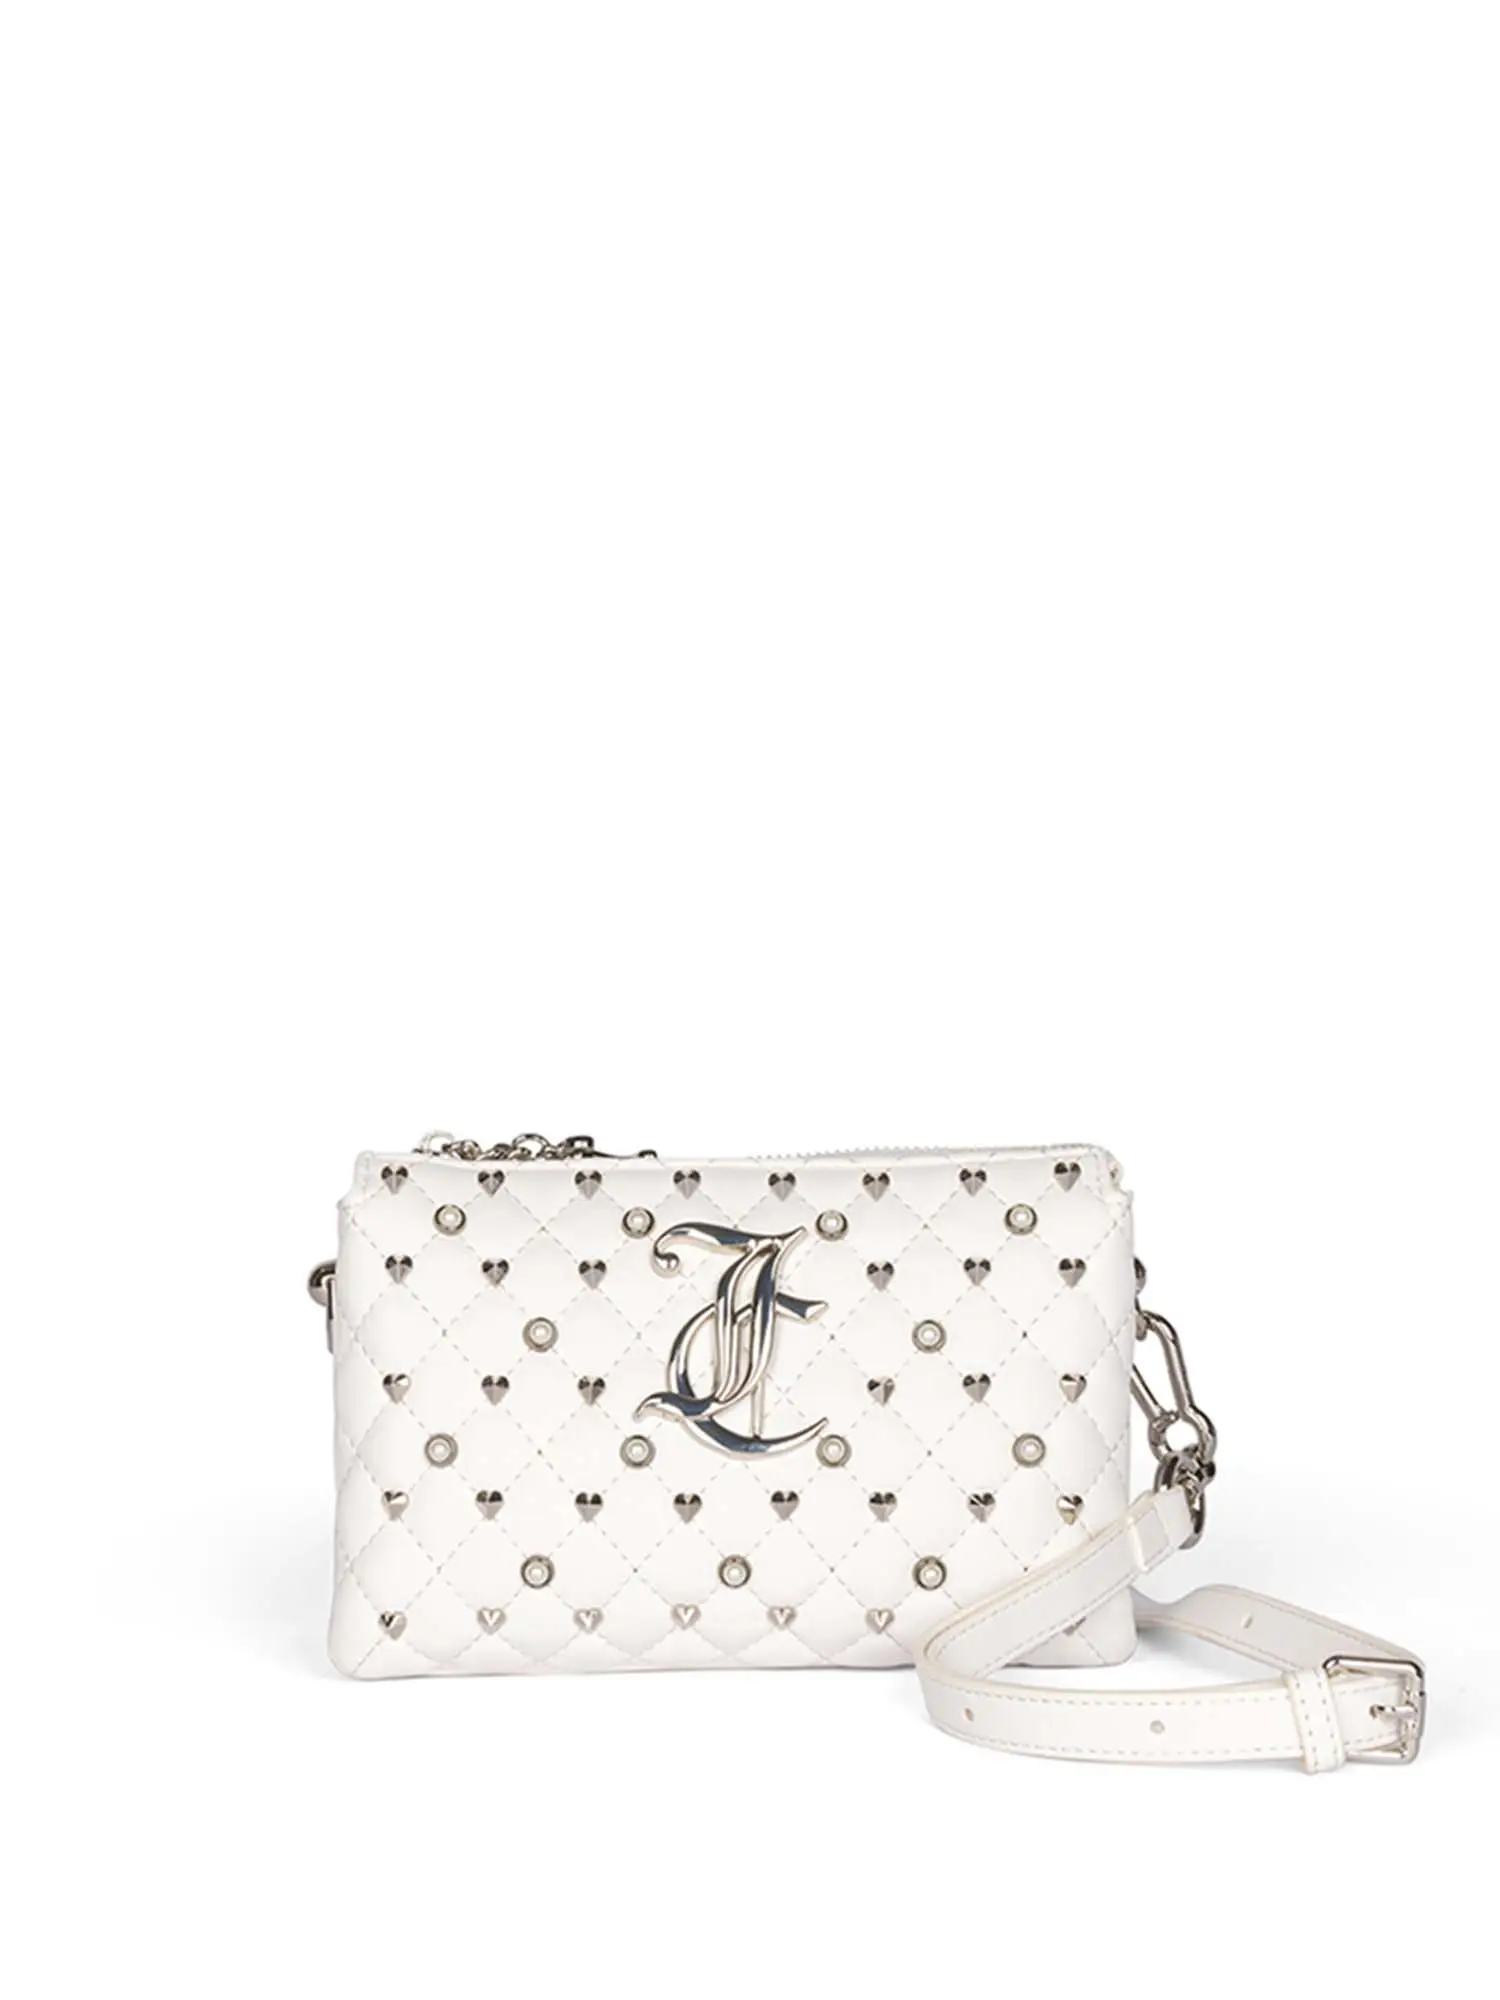 TRACOLLA DONNA - JUICY COUTURE - BEJAY5478WVP - BIANCO, UNICA